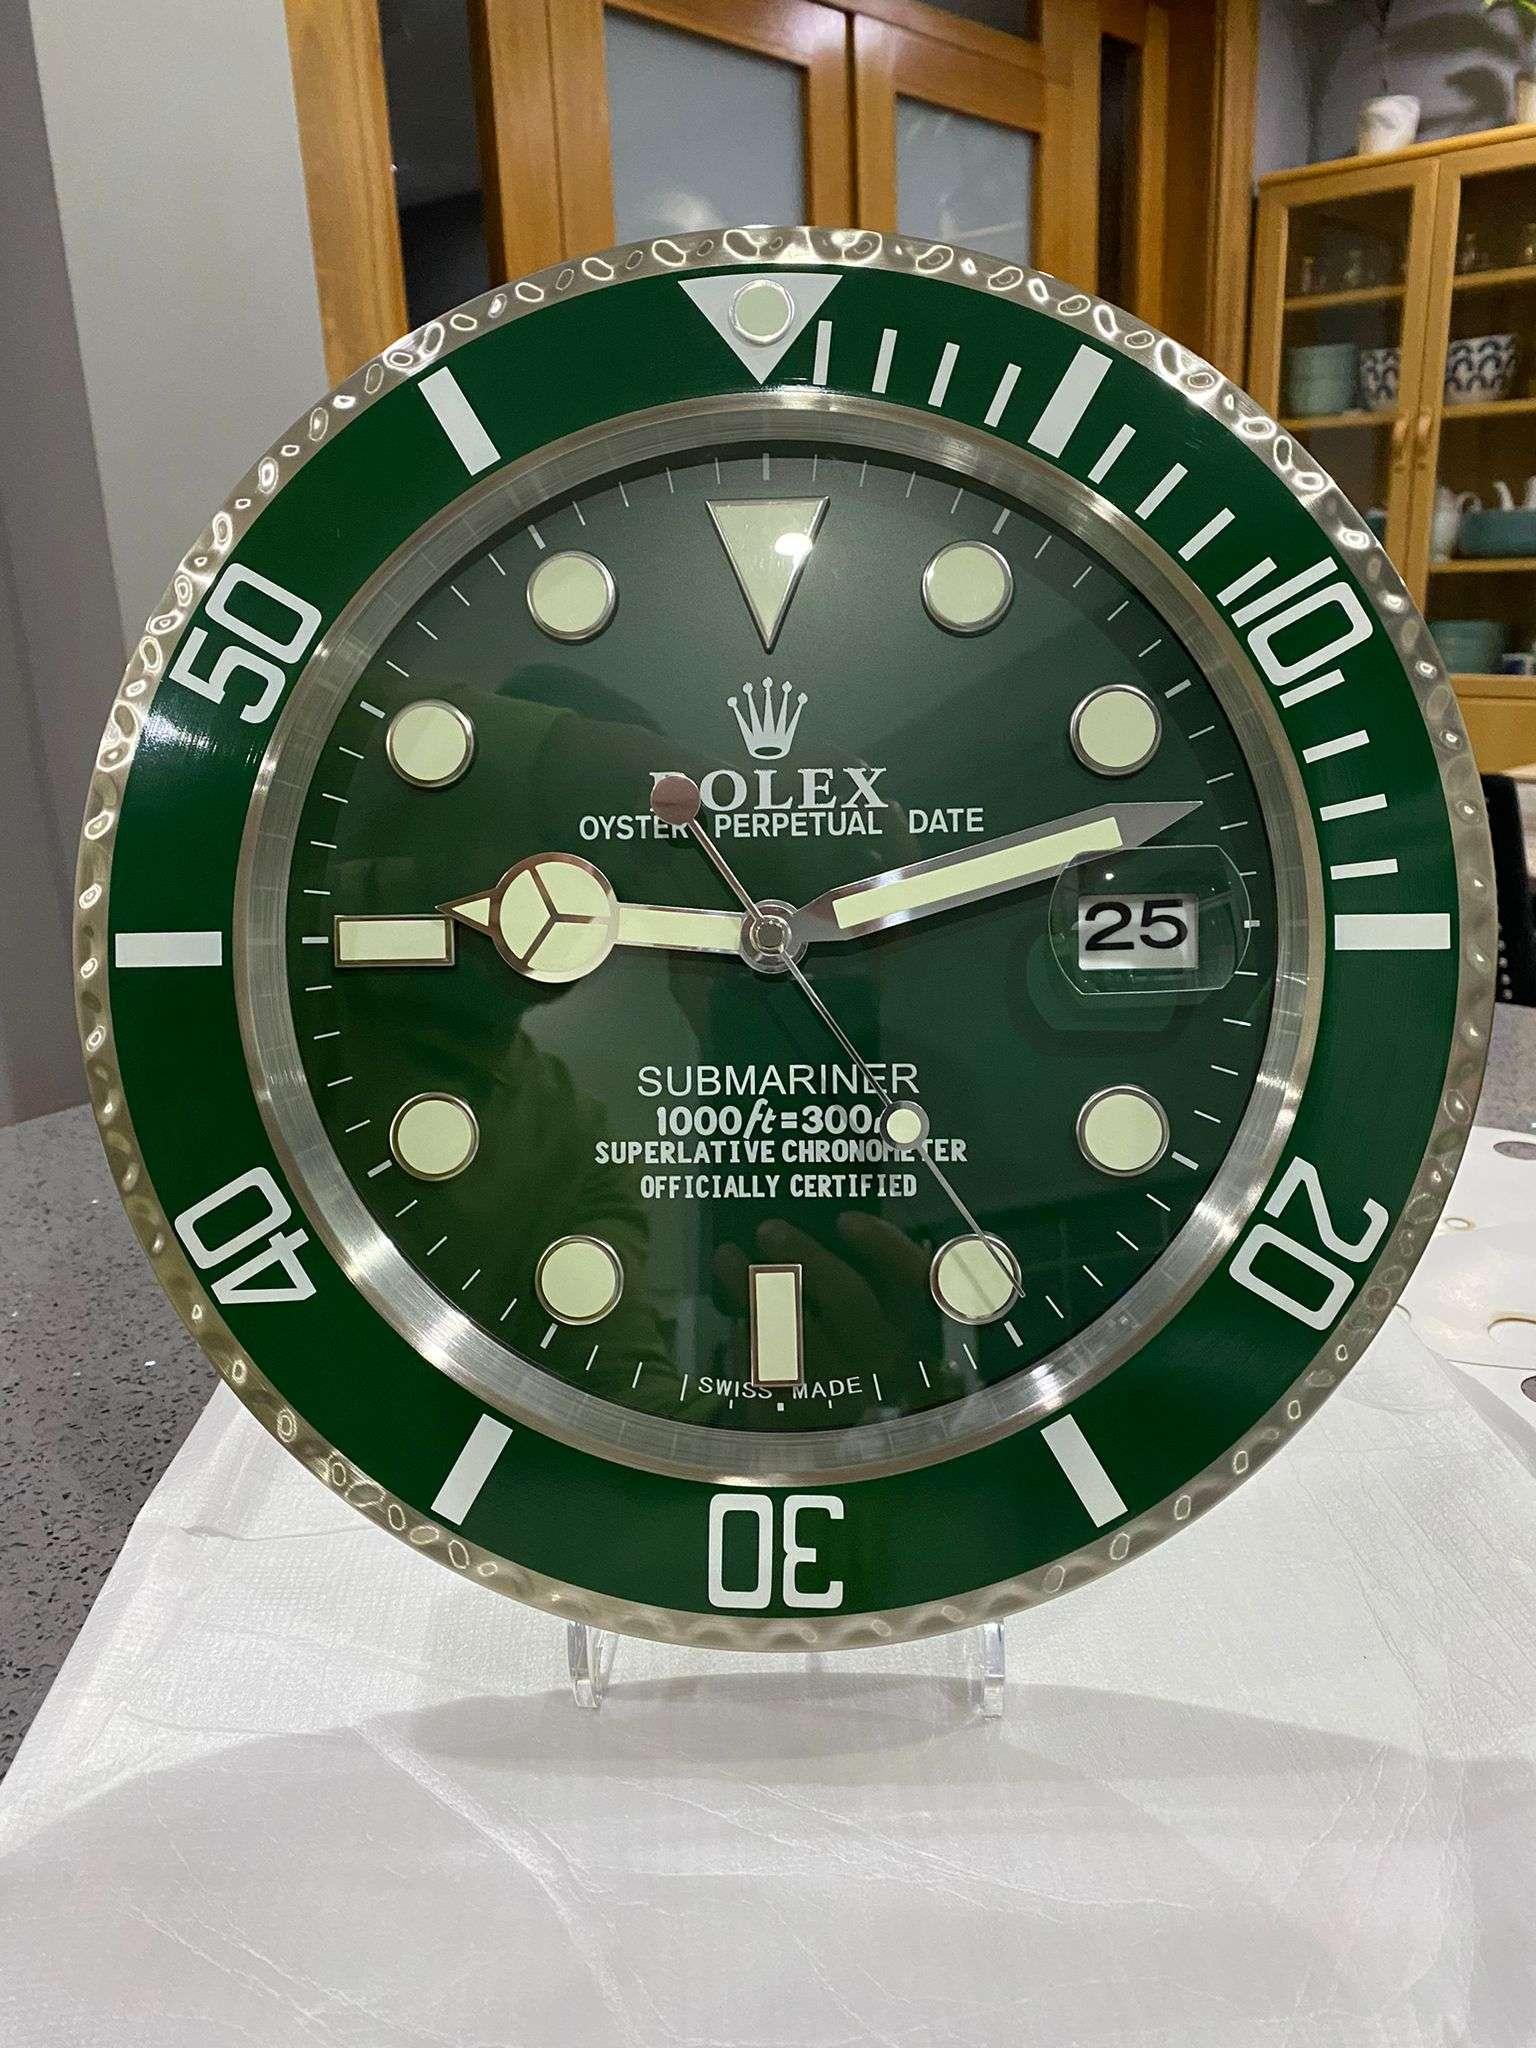 ROLEX Officially Certified Oyster Perpetual Hulk Submariner Luxury Wall Clock 
With lume strips Sweeping Quartz movement powered by single AA Battery.
Clock dimensions measure approximately 35cm by 5cm thickness Date with magnifying glass and modern